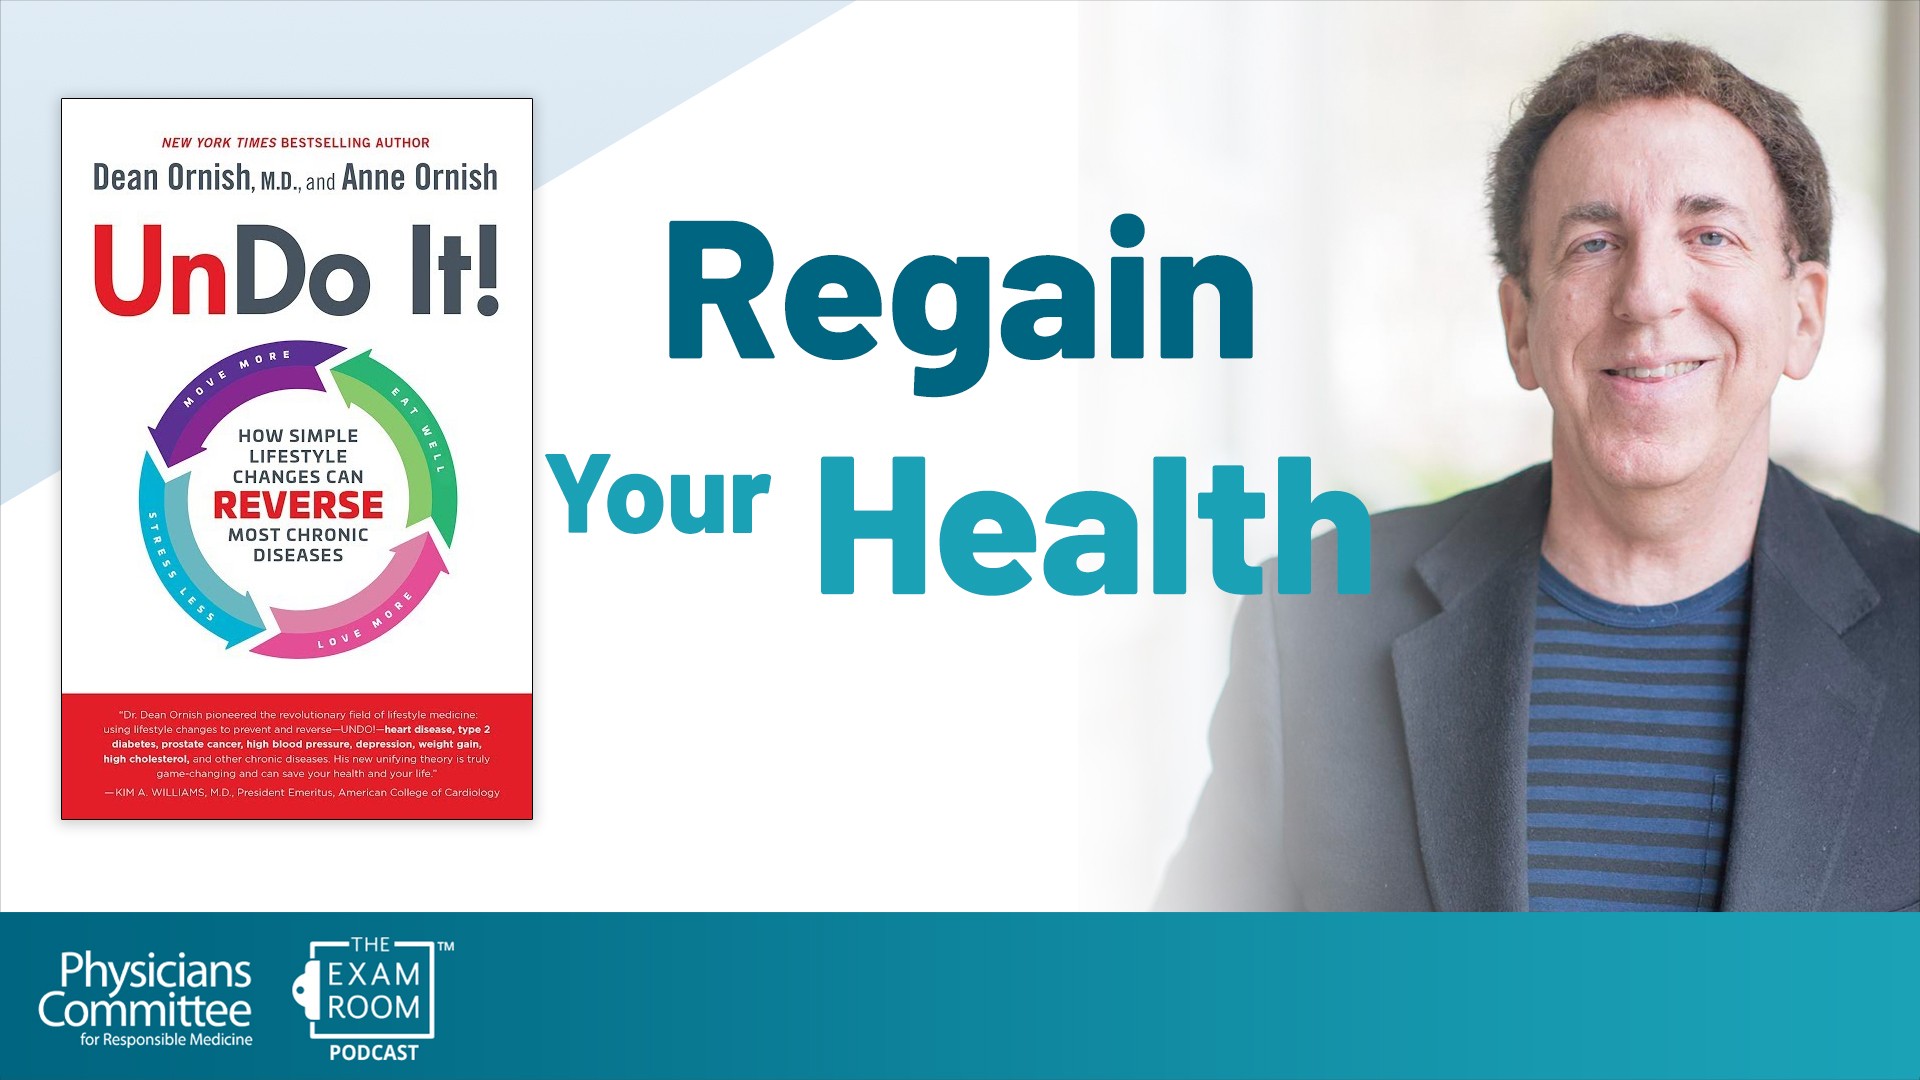 Dr. Dean Ornish: Reclaiming Your Health and Undoing Disease